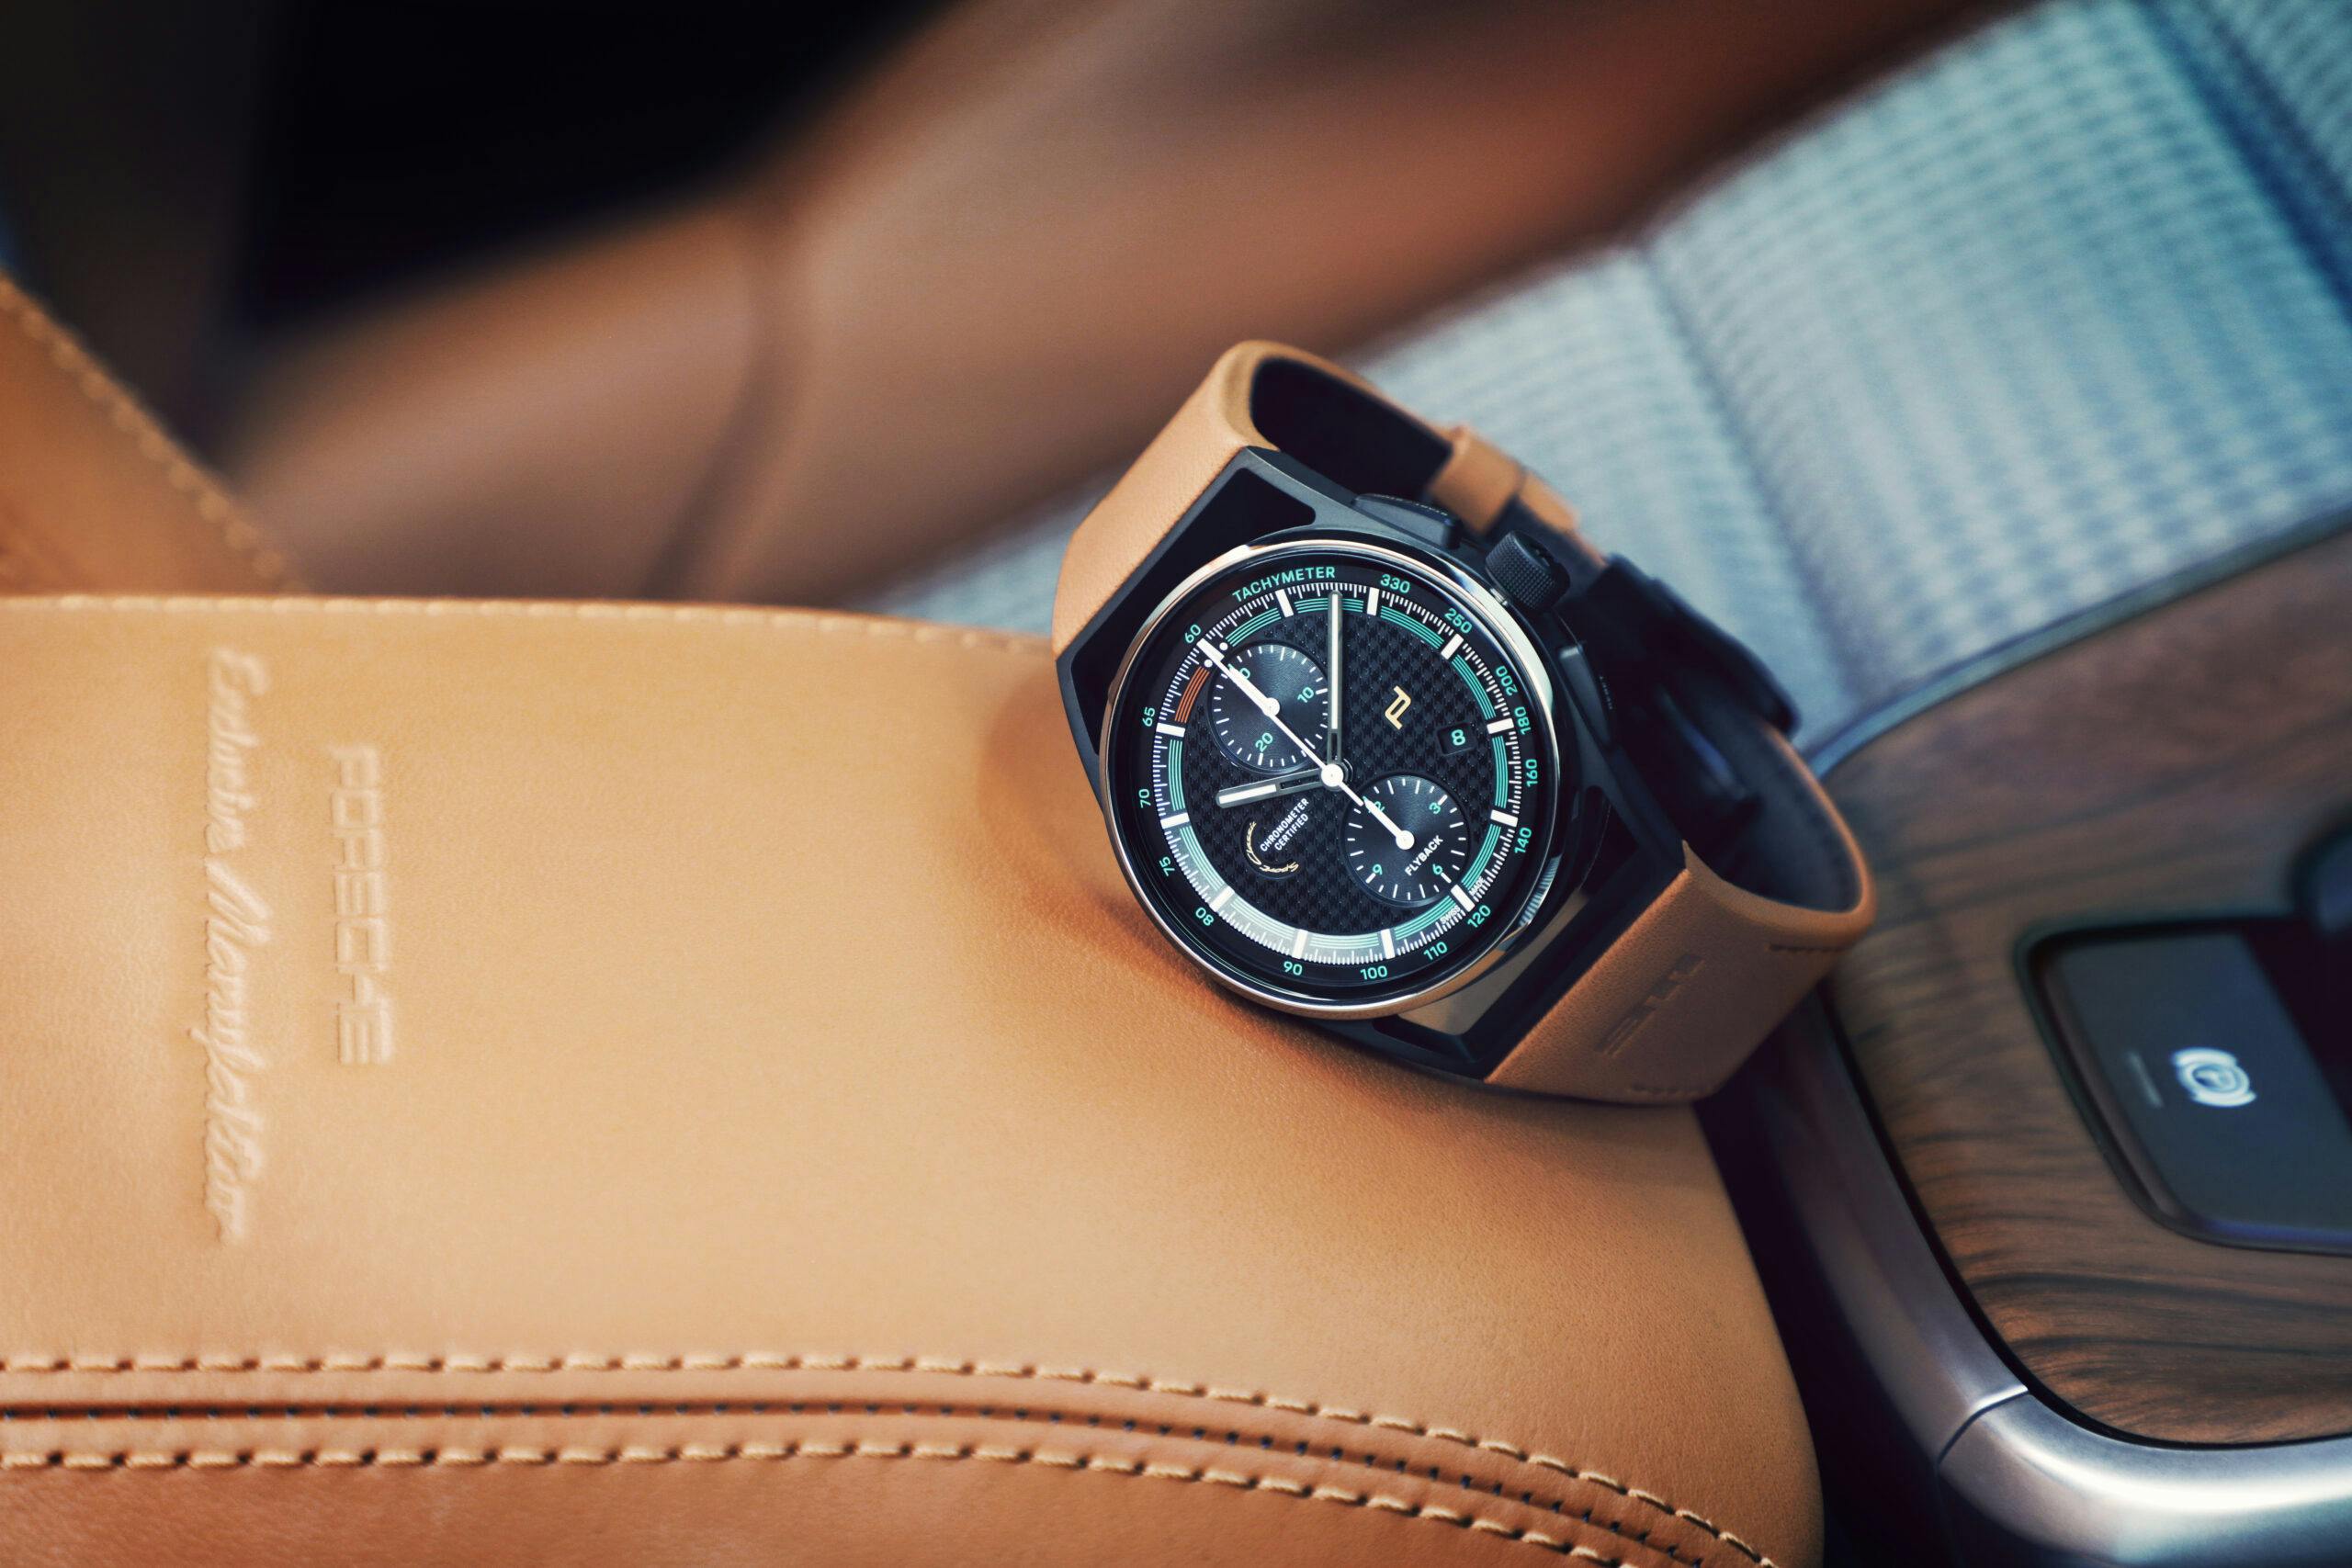 ICONS OF COOL – ON THE ROAD AND WRIST